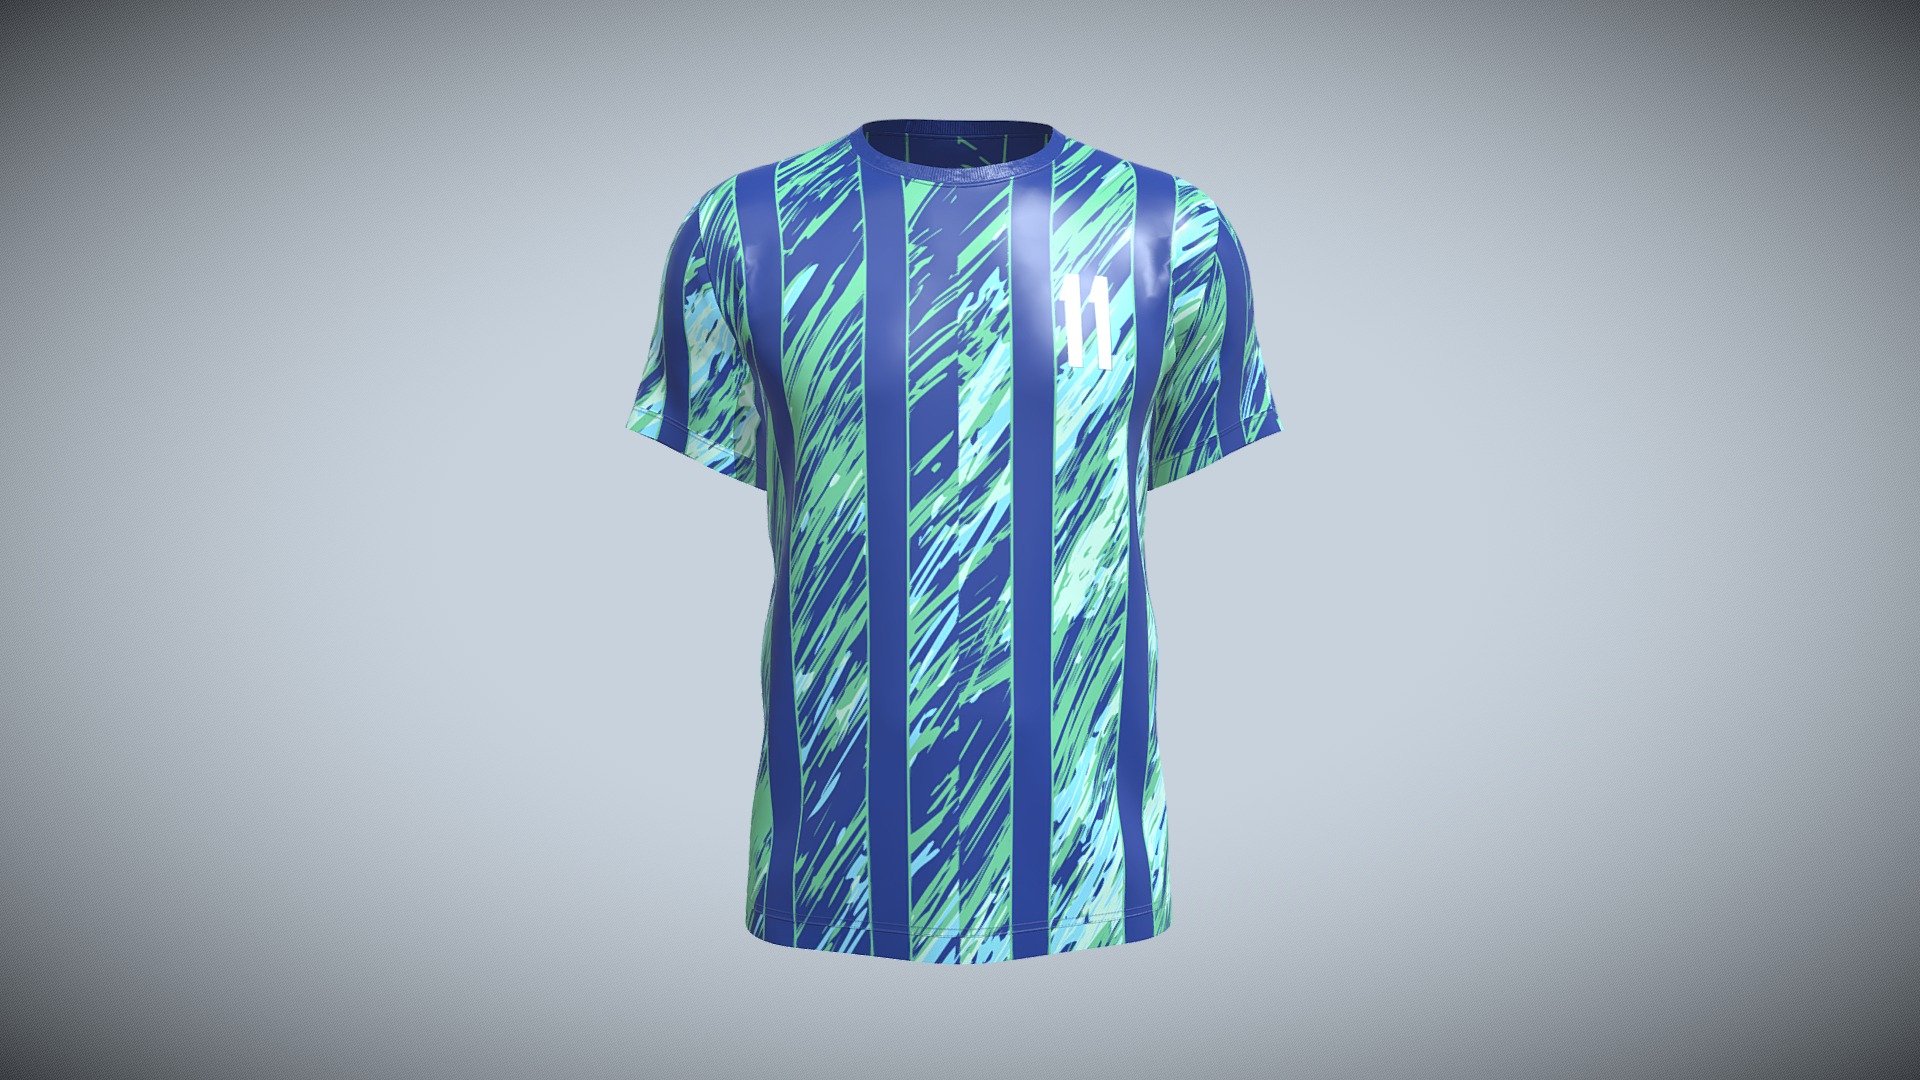 Soccer Blue Stripe Jersey Player-11 V2

I am a Professional 3D Fashion/Apprel Designer. I have 7 years working experience about 3D Fashion. I am working with Clo3d, Marvelous Designer (MD), Daz3d, Blender, Cinema4d, Etc.

Features:
1.  2k UV Texture
2.  Triangle mesh
3.  Textures with Non-overlapping UV Map (2048x2048 Pixels)
4.  In additonal Textures folder have diffuse,displacement,metalness,normal,opacity,roughness maps.

Attachment Fils:
Exported Files (All are exported in DAZ Studio scale)
* OBJ
* FBX
* Marvelous Designer/Clo3d file (zprj)

Thanks 3d model